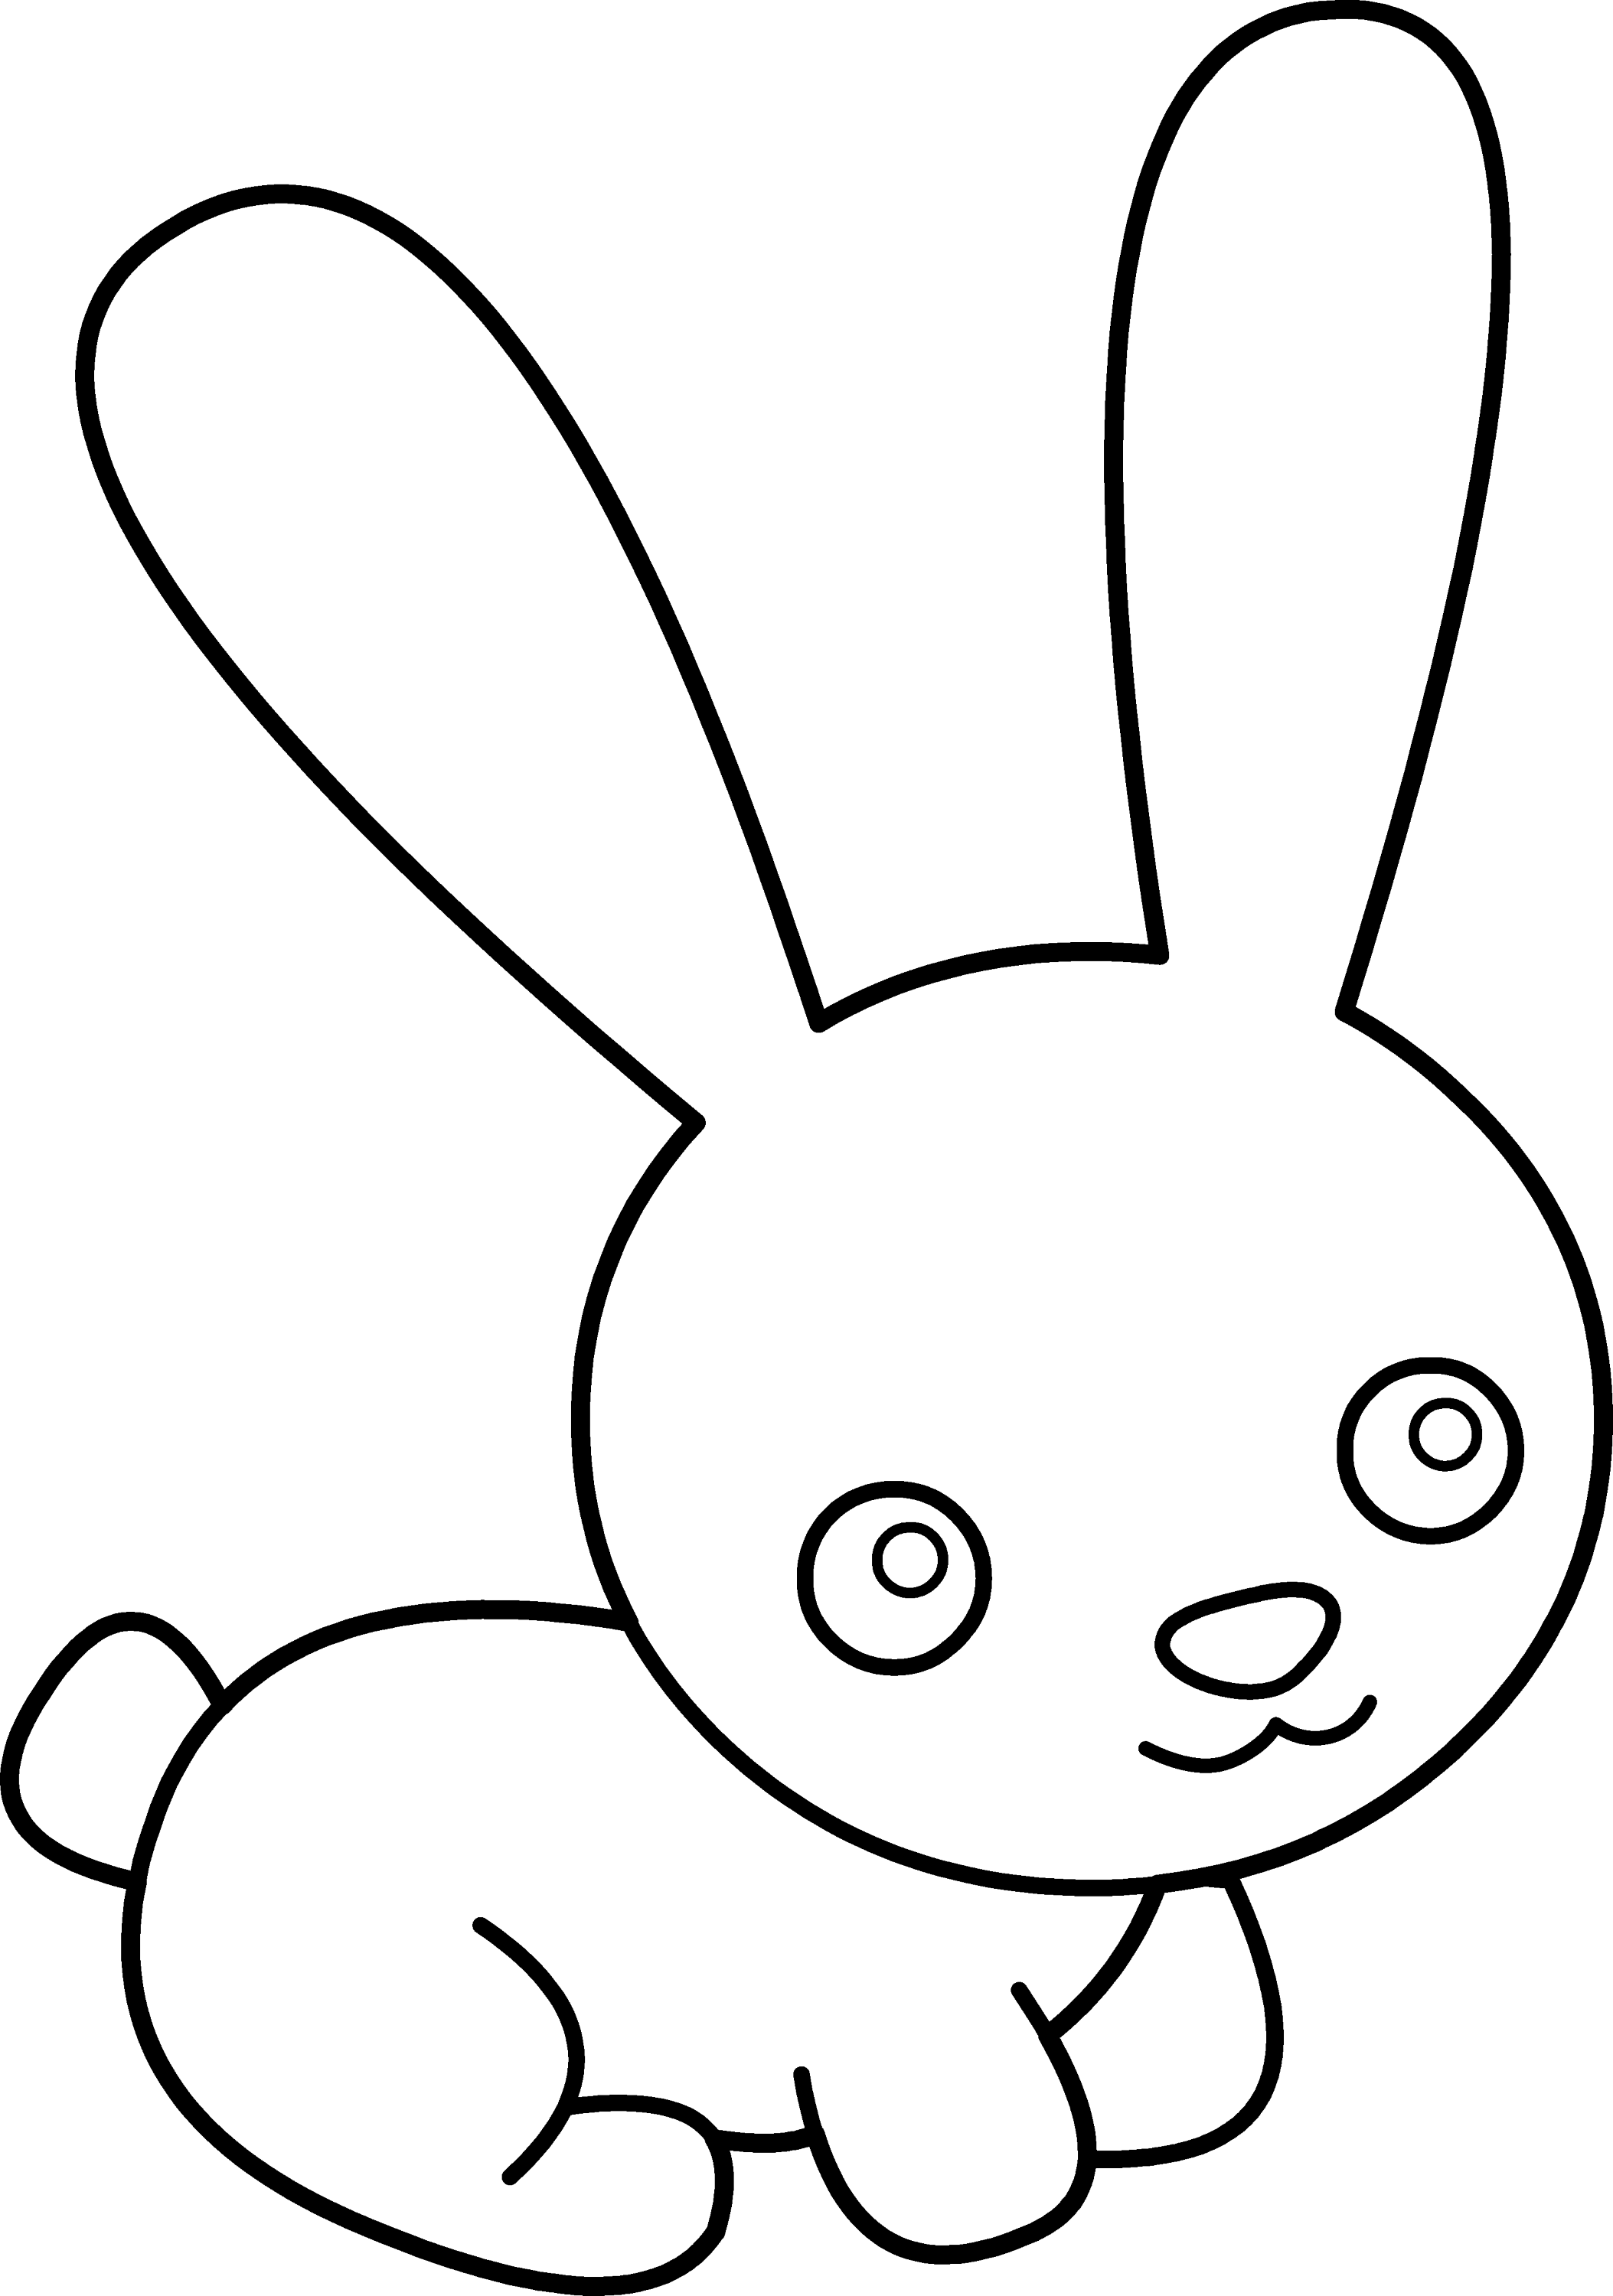 Cute Bunny Coloring Page Free Clip Art